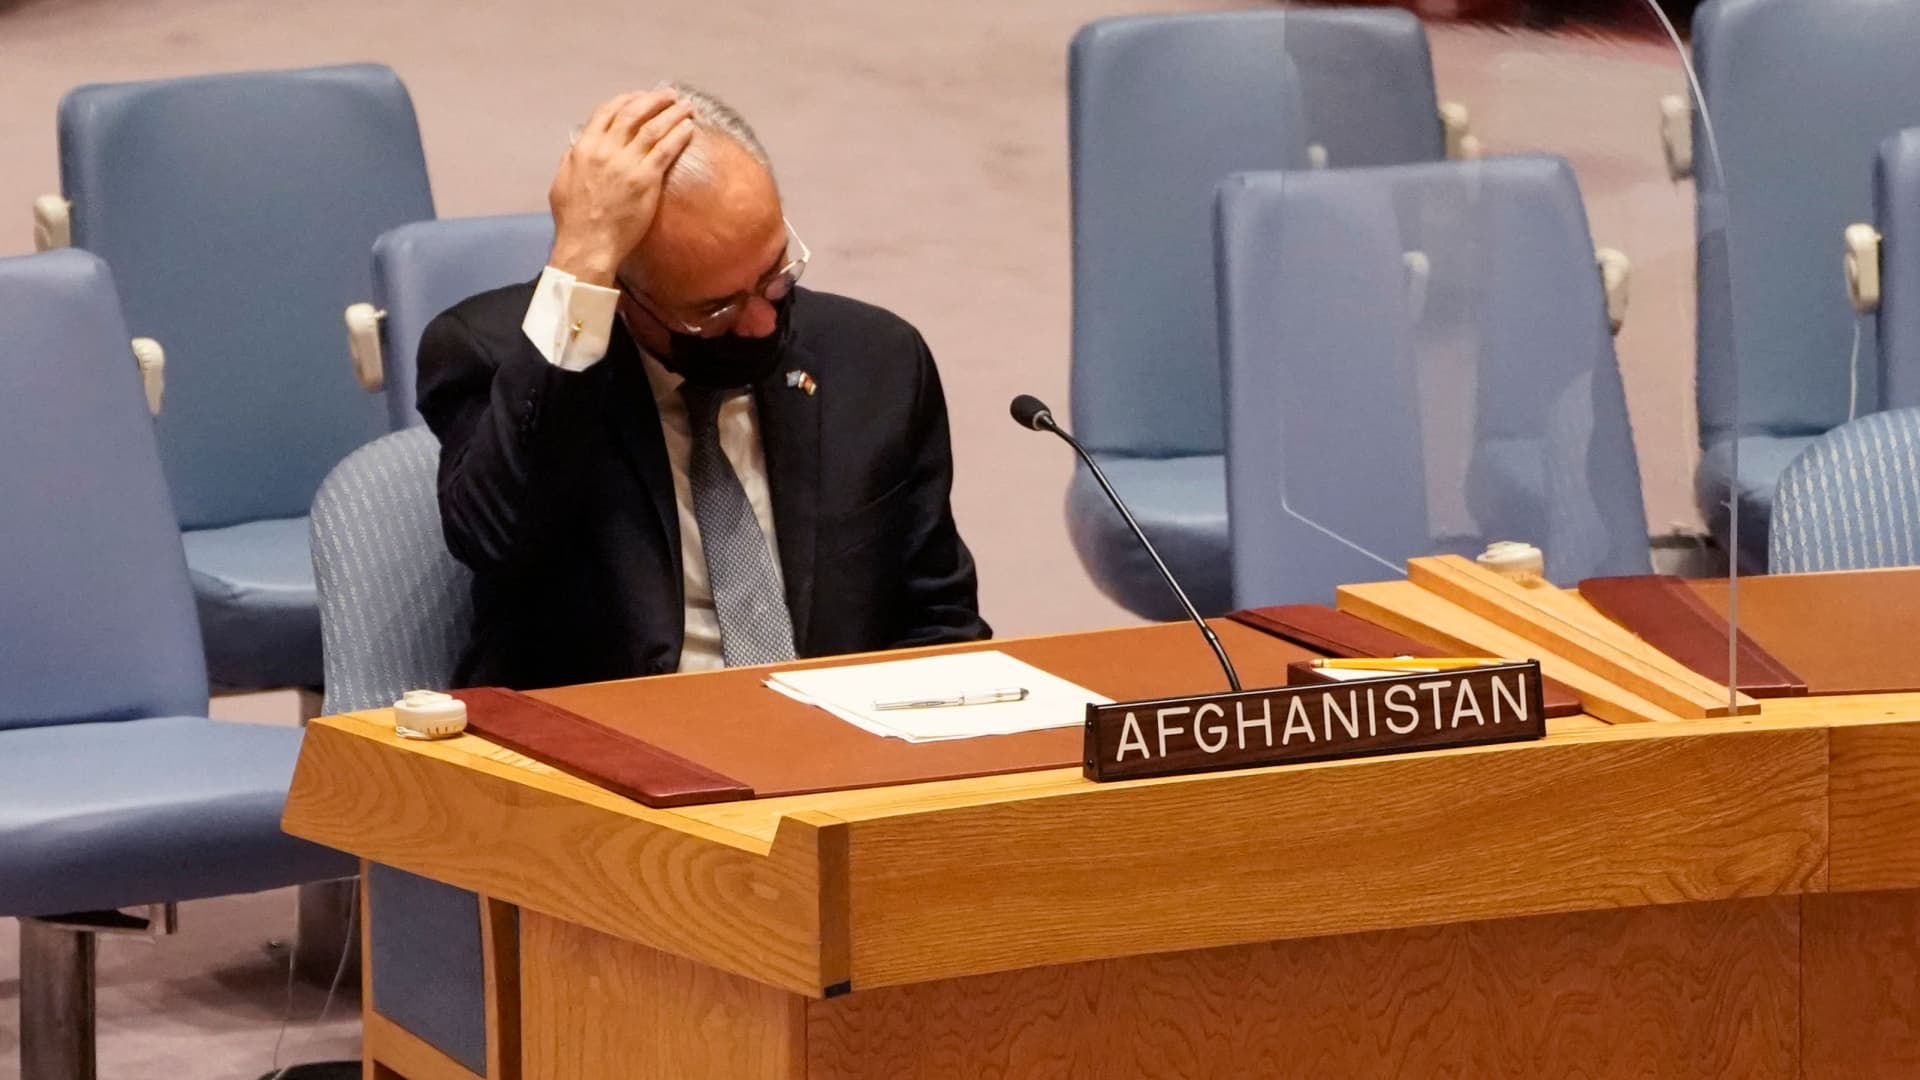 Permanent Representative of Afghanistan to the United Nations, Ghulam M. Isaczai waits to speak during a UN security council meeting on Afghanistan on August 16, 2021 at the United Nations in New York.